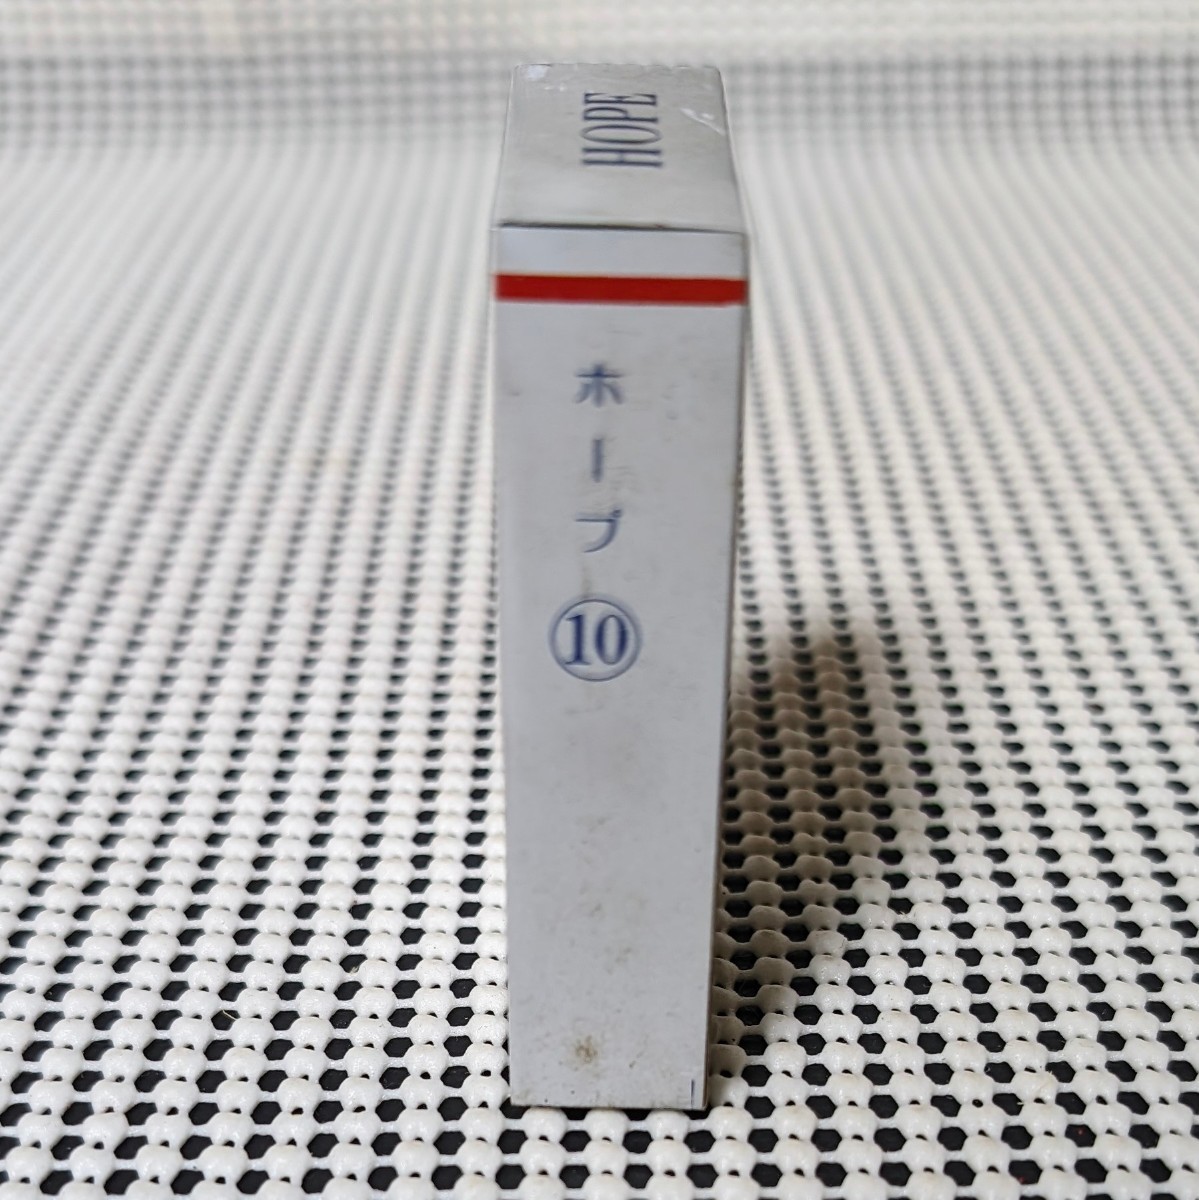  all country cigarettes sale . same collection . ream .. cigarettes packing model self . machine model sample cigarettes cigarettes HOPE Hope shopo sample dummy sample mok made of metal 